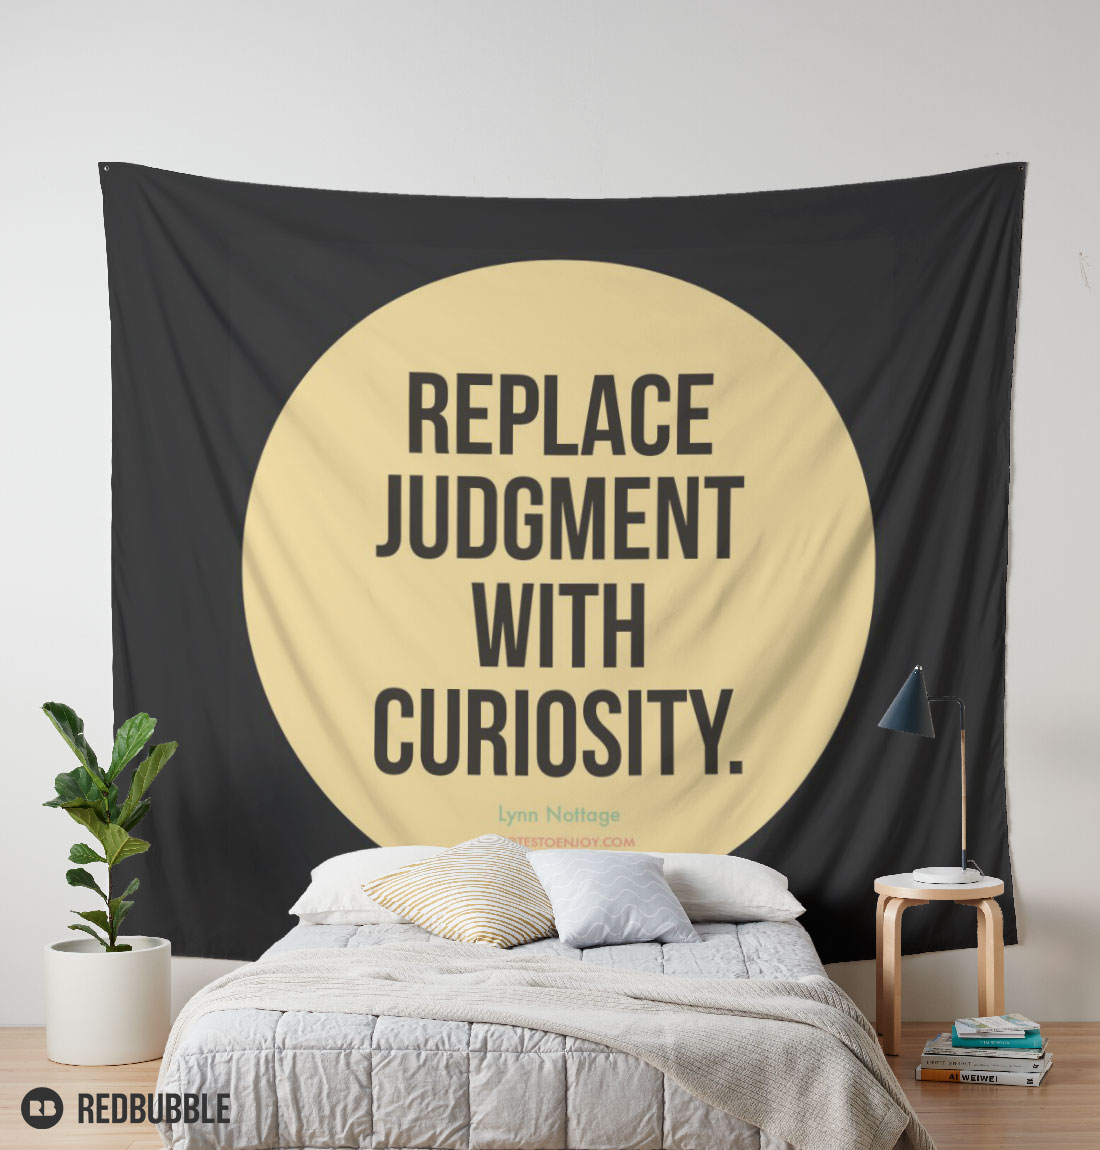 Replace judgment with curiosity quote tapestry